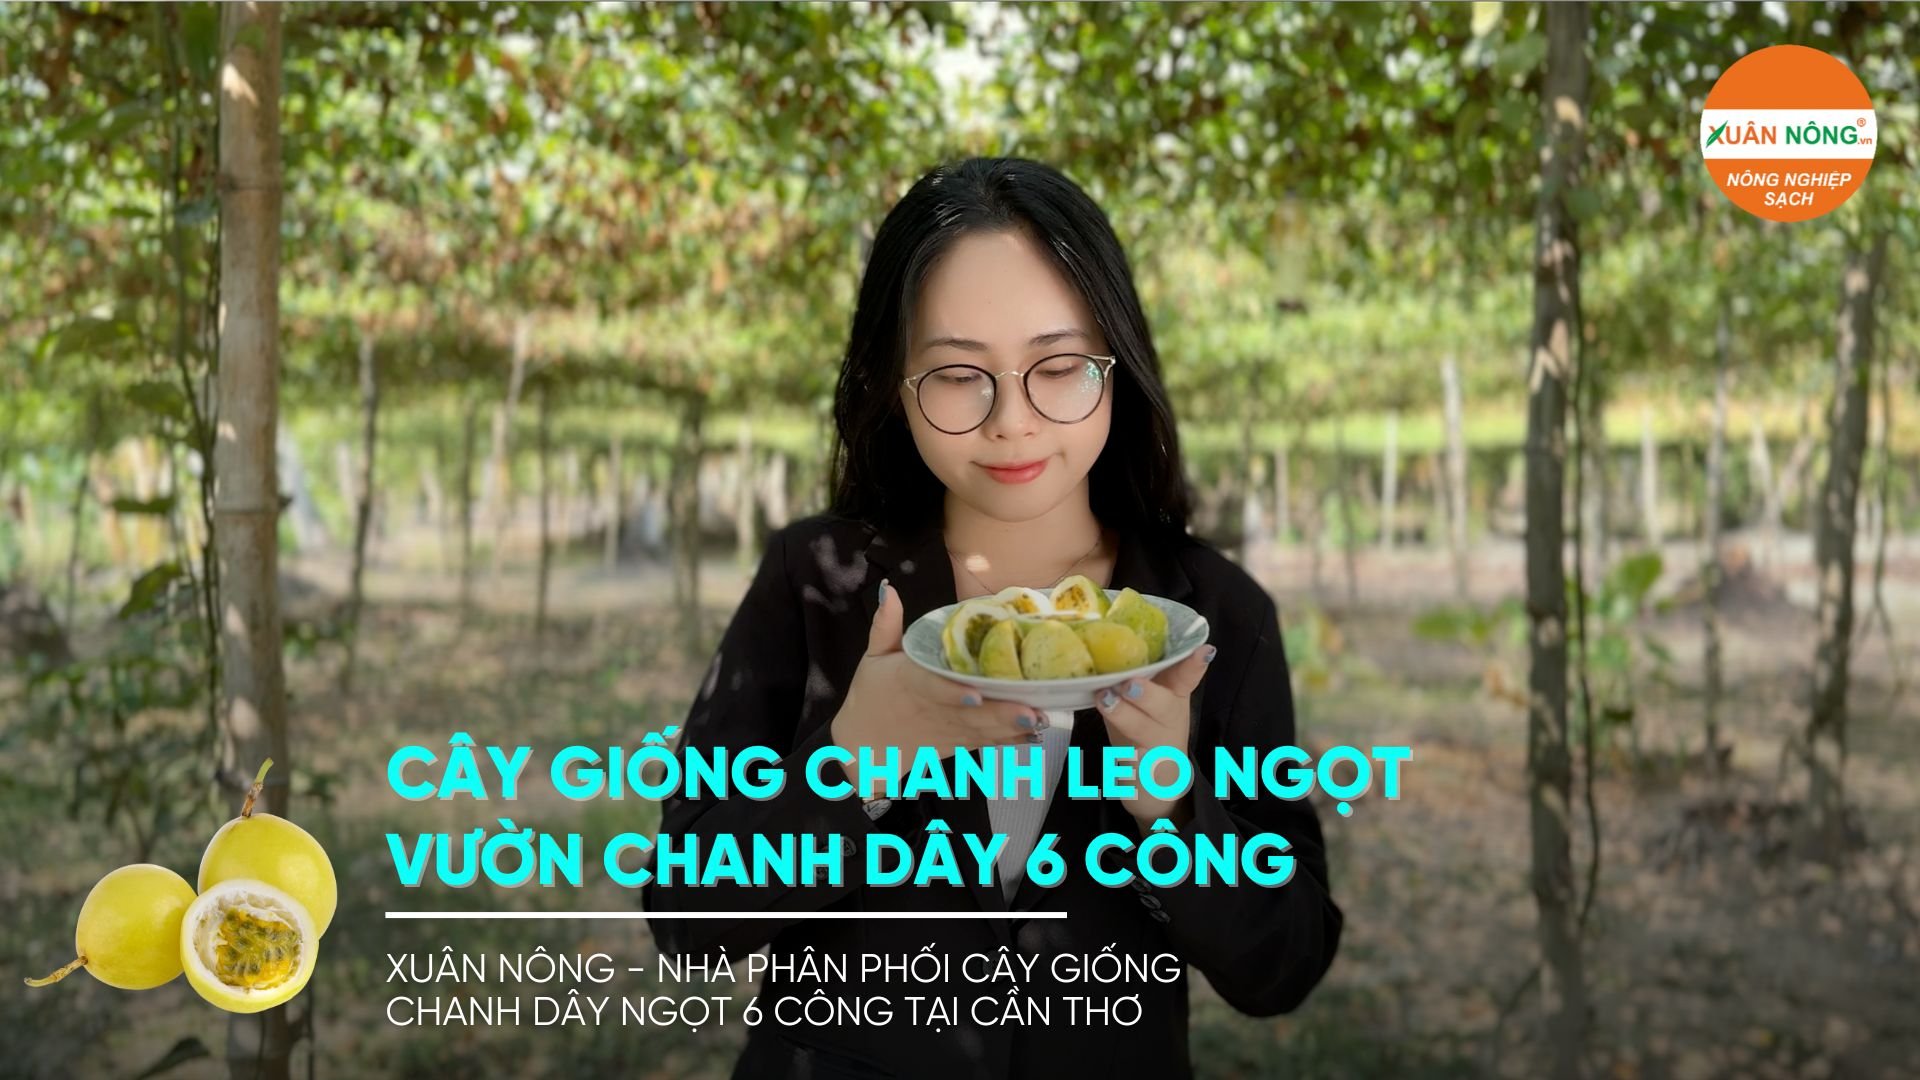 chanh day ngot 6 Cong